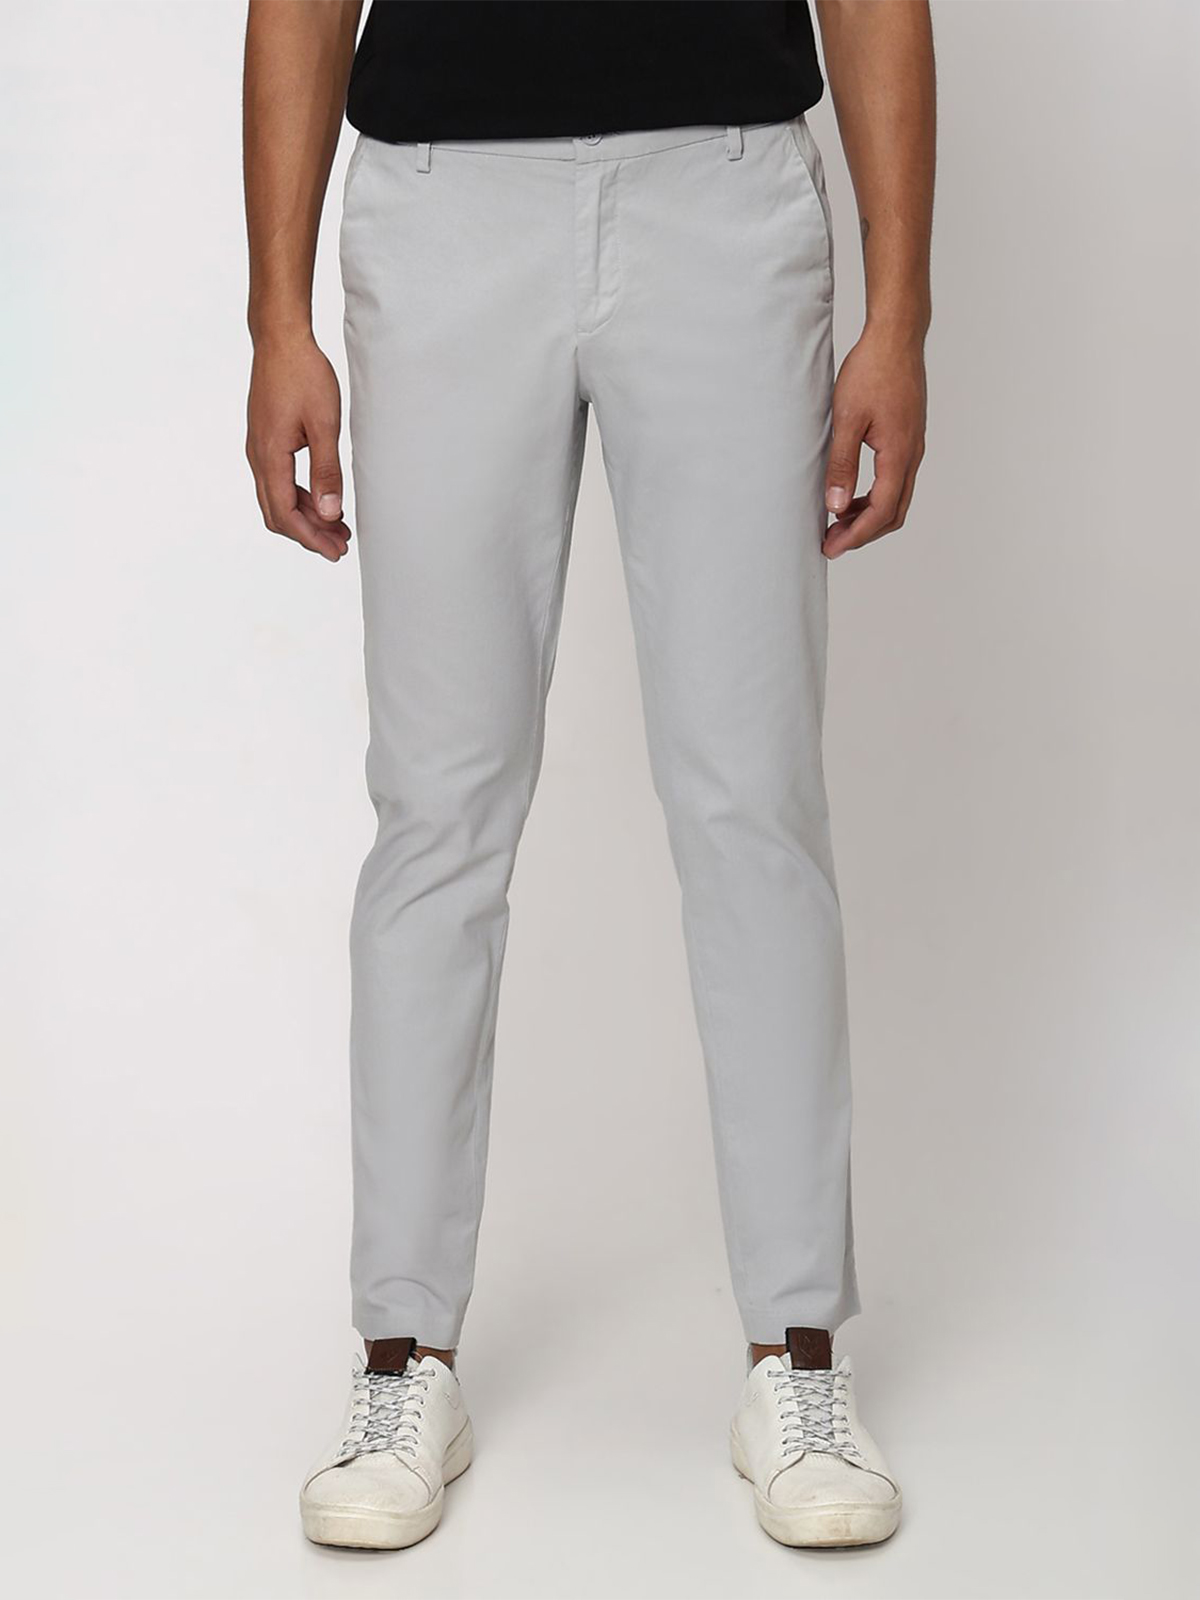 Mufti New Cargo Trousers - Buy Mufti New Cargo Trousers online in India